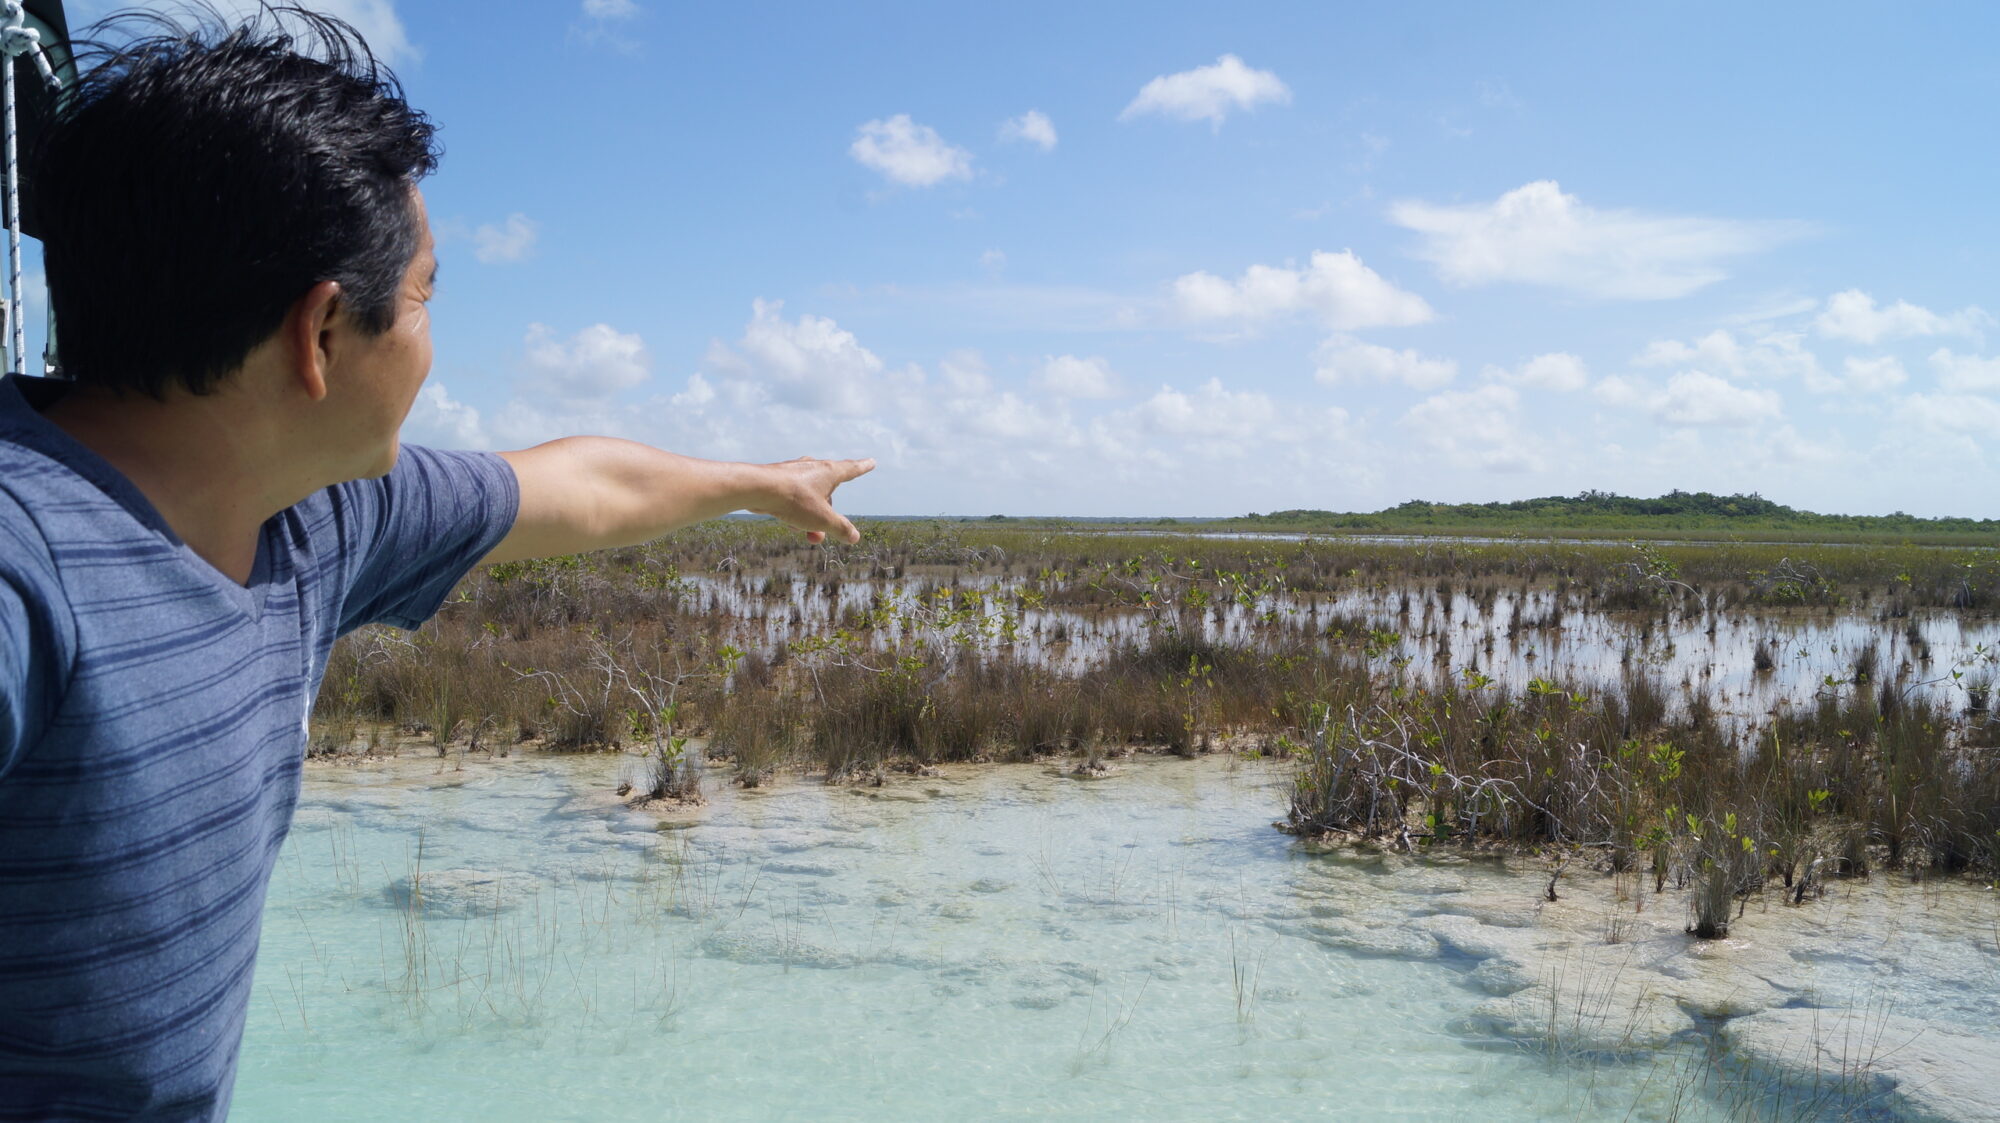 Professor Martin Maas points out the area where the red mangroves reforested by his students